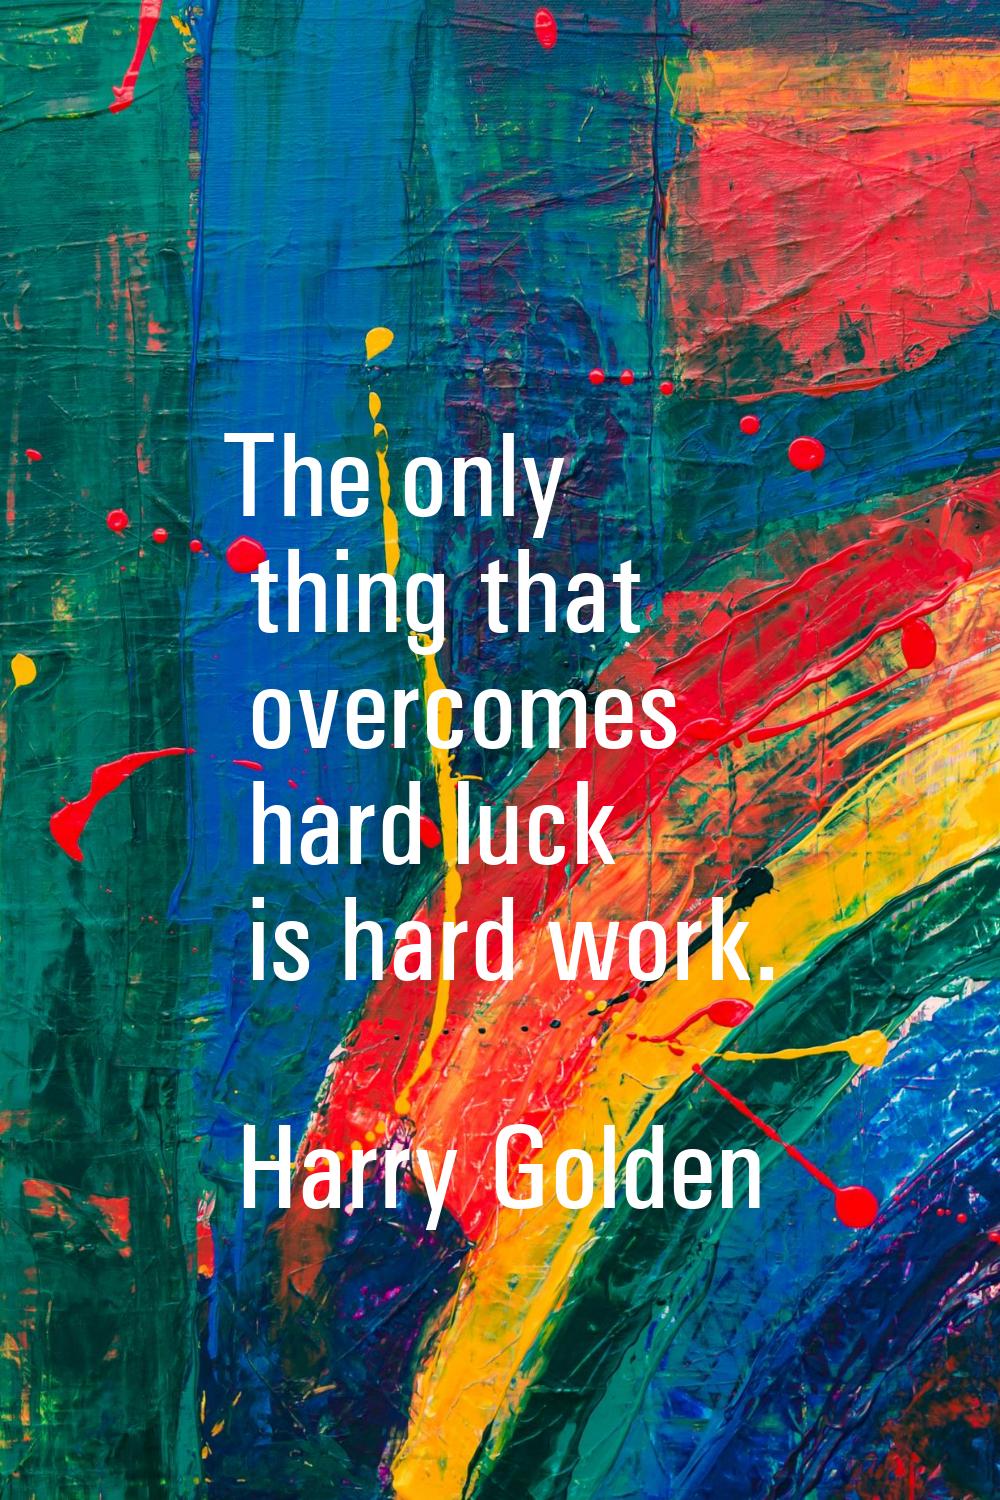 The only thing that overcomes hard luck is hard work.